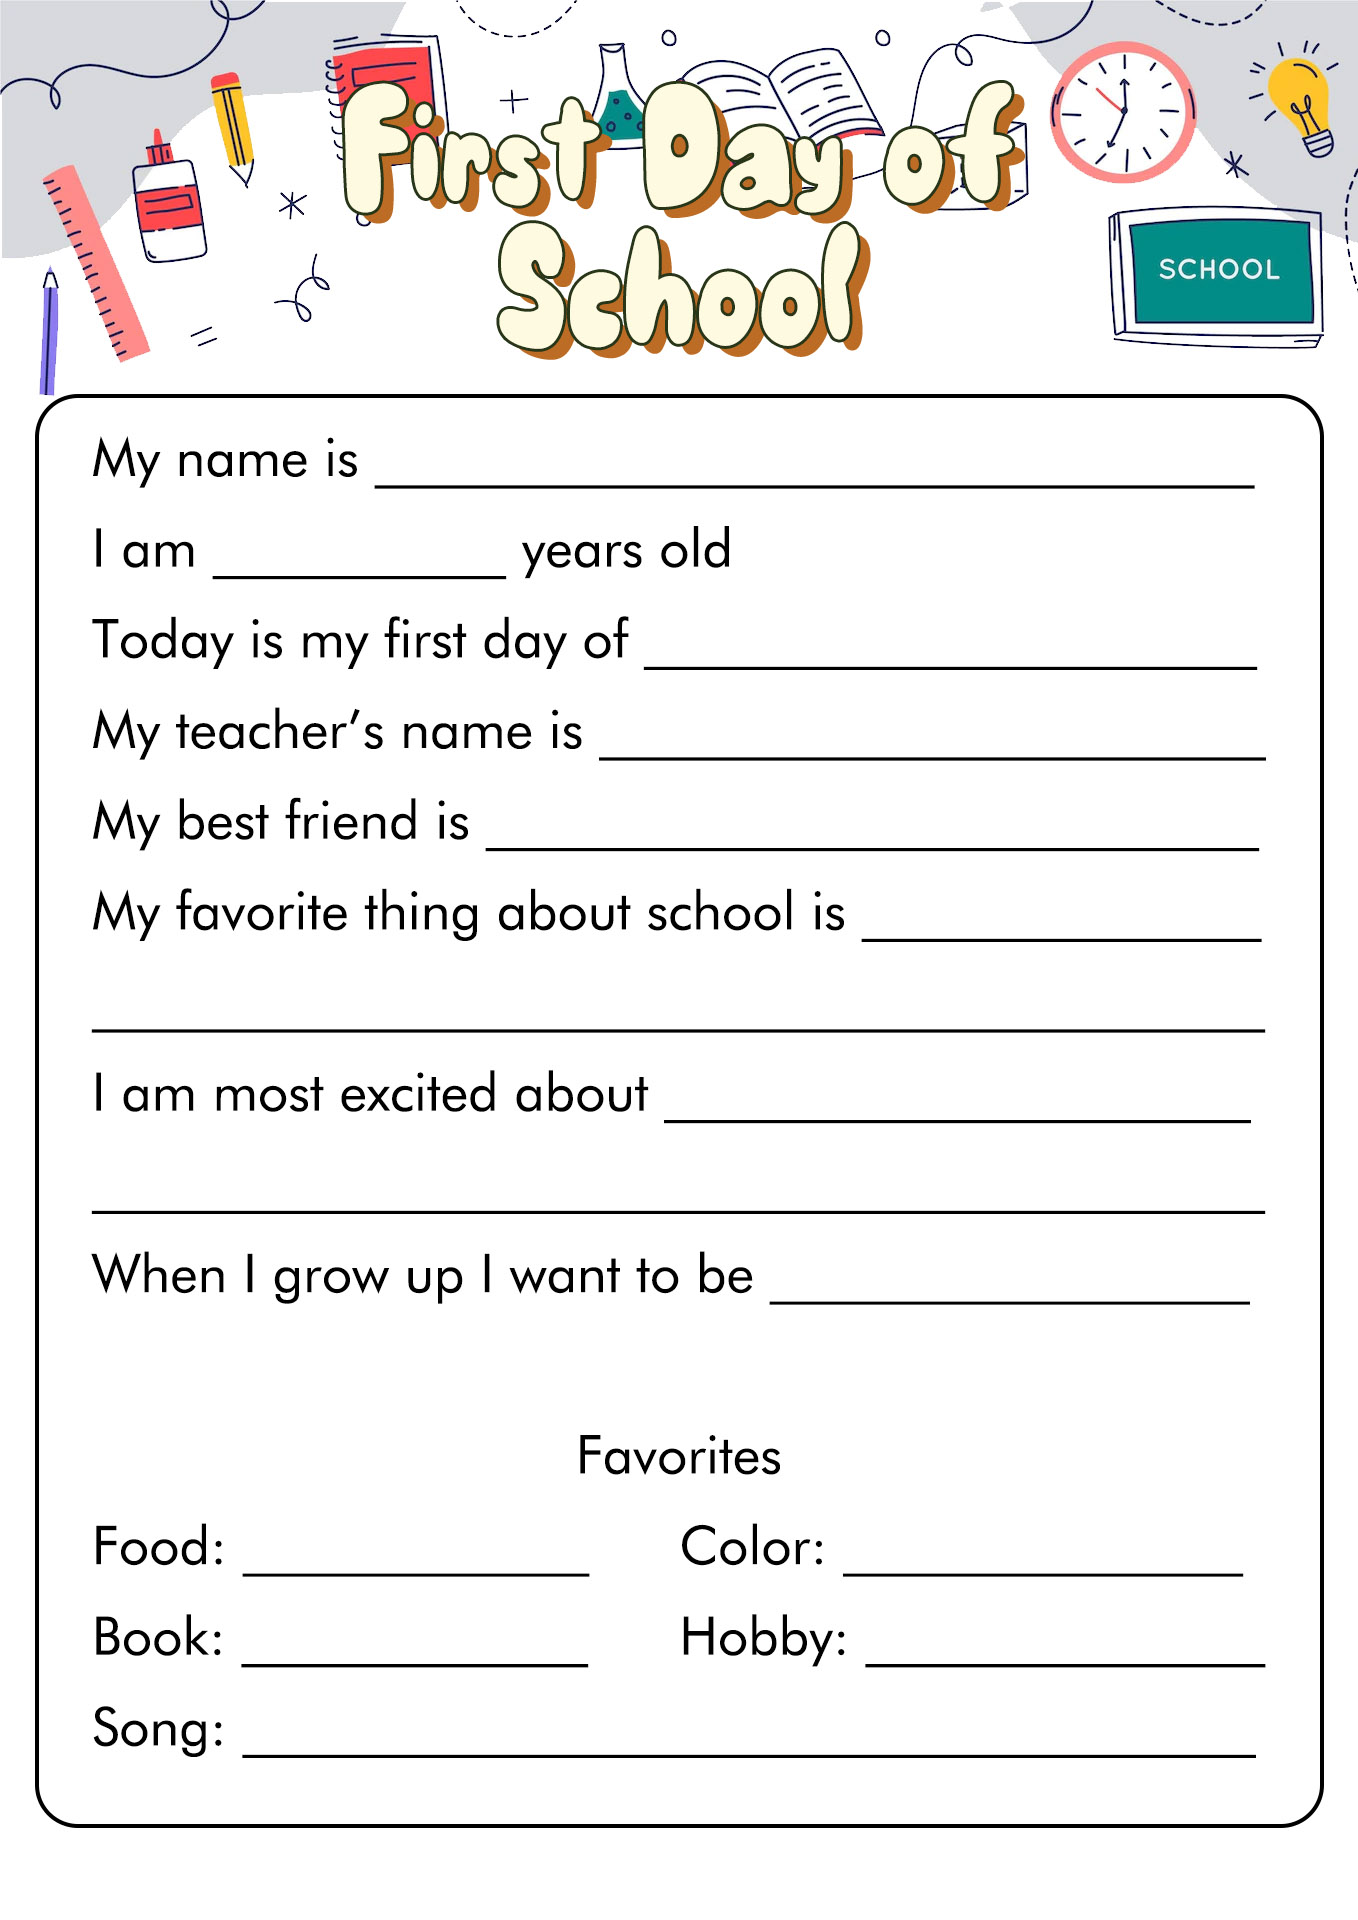 First Day of School Printable Worksheets Image